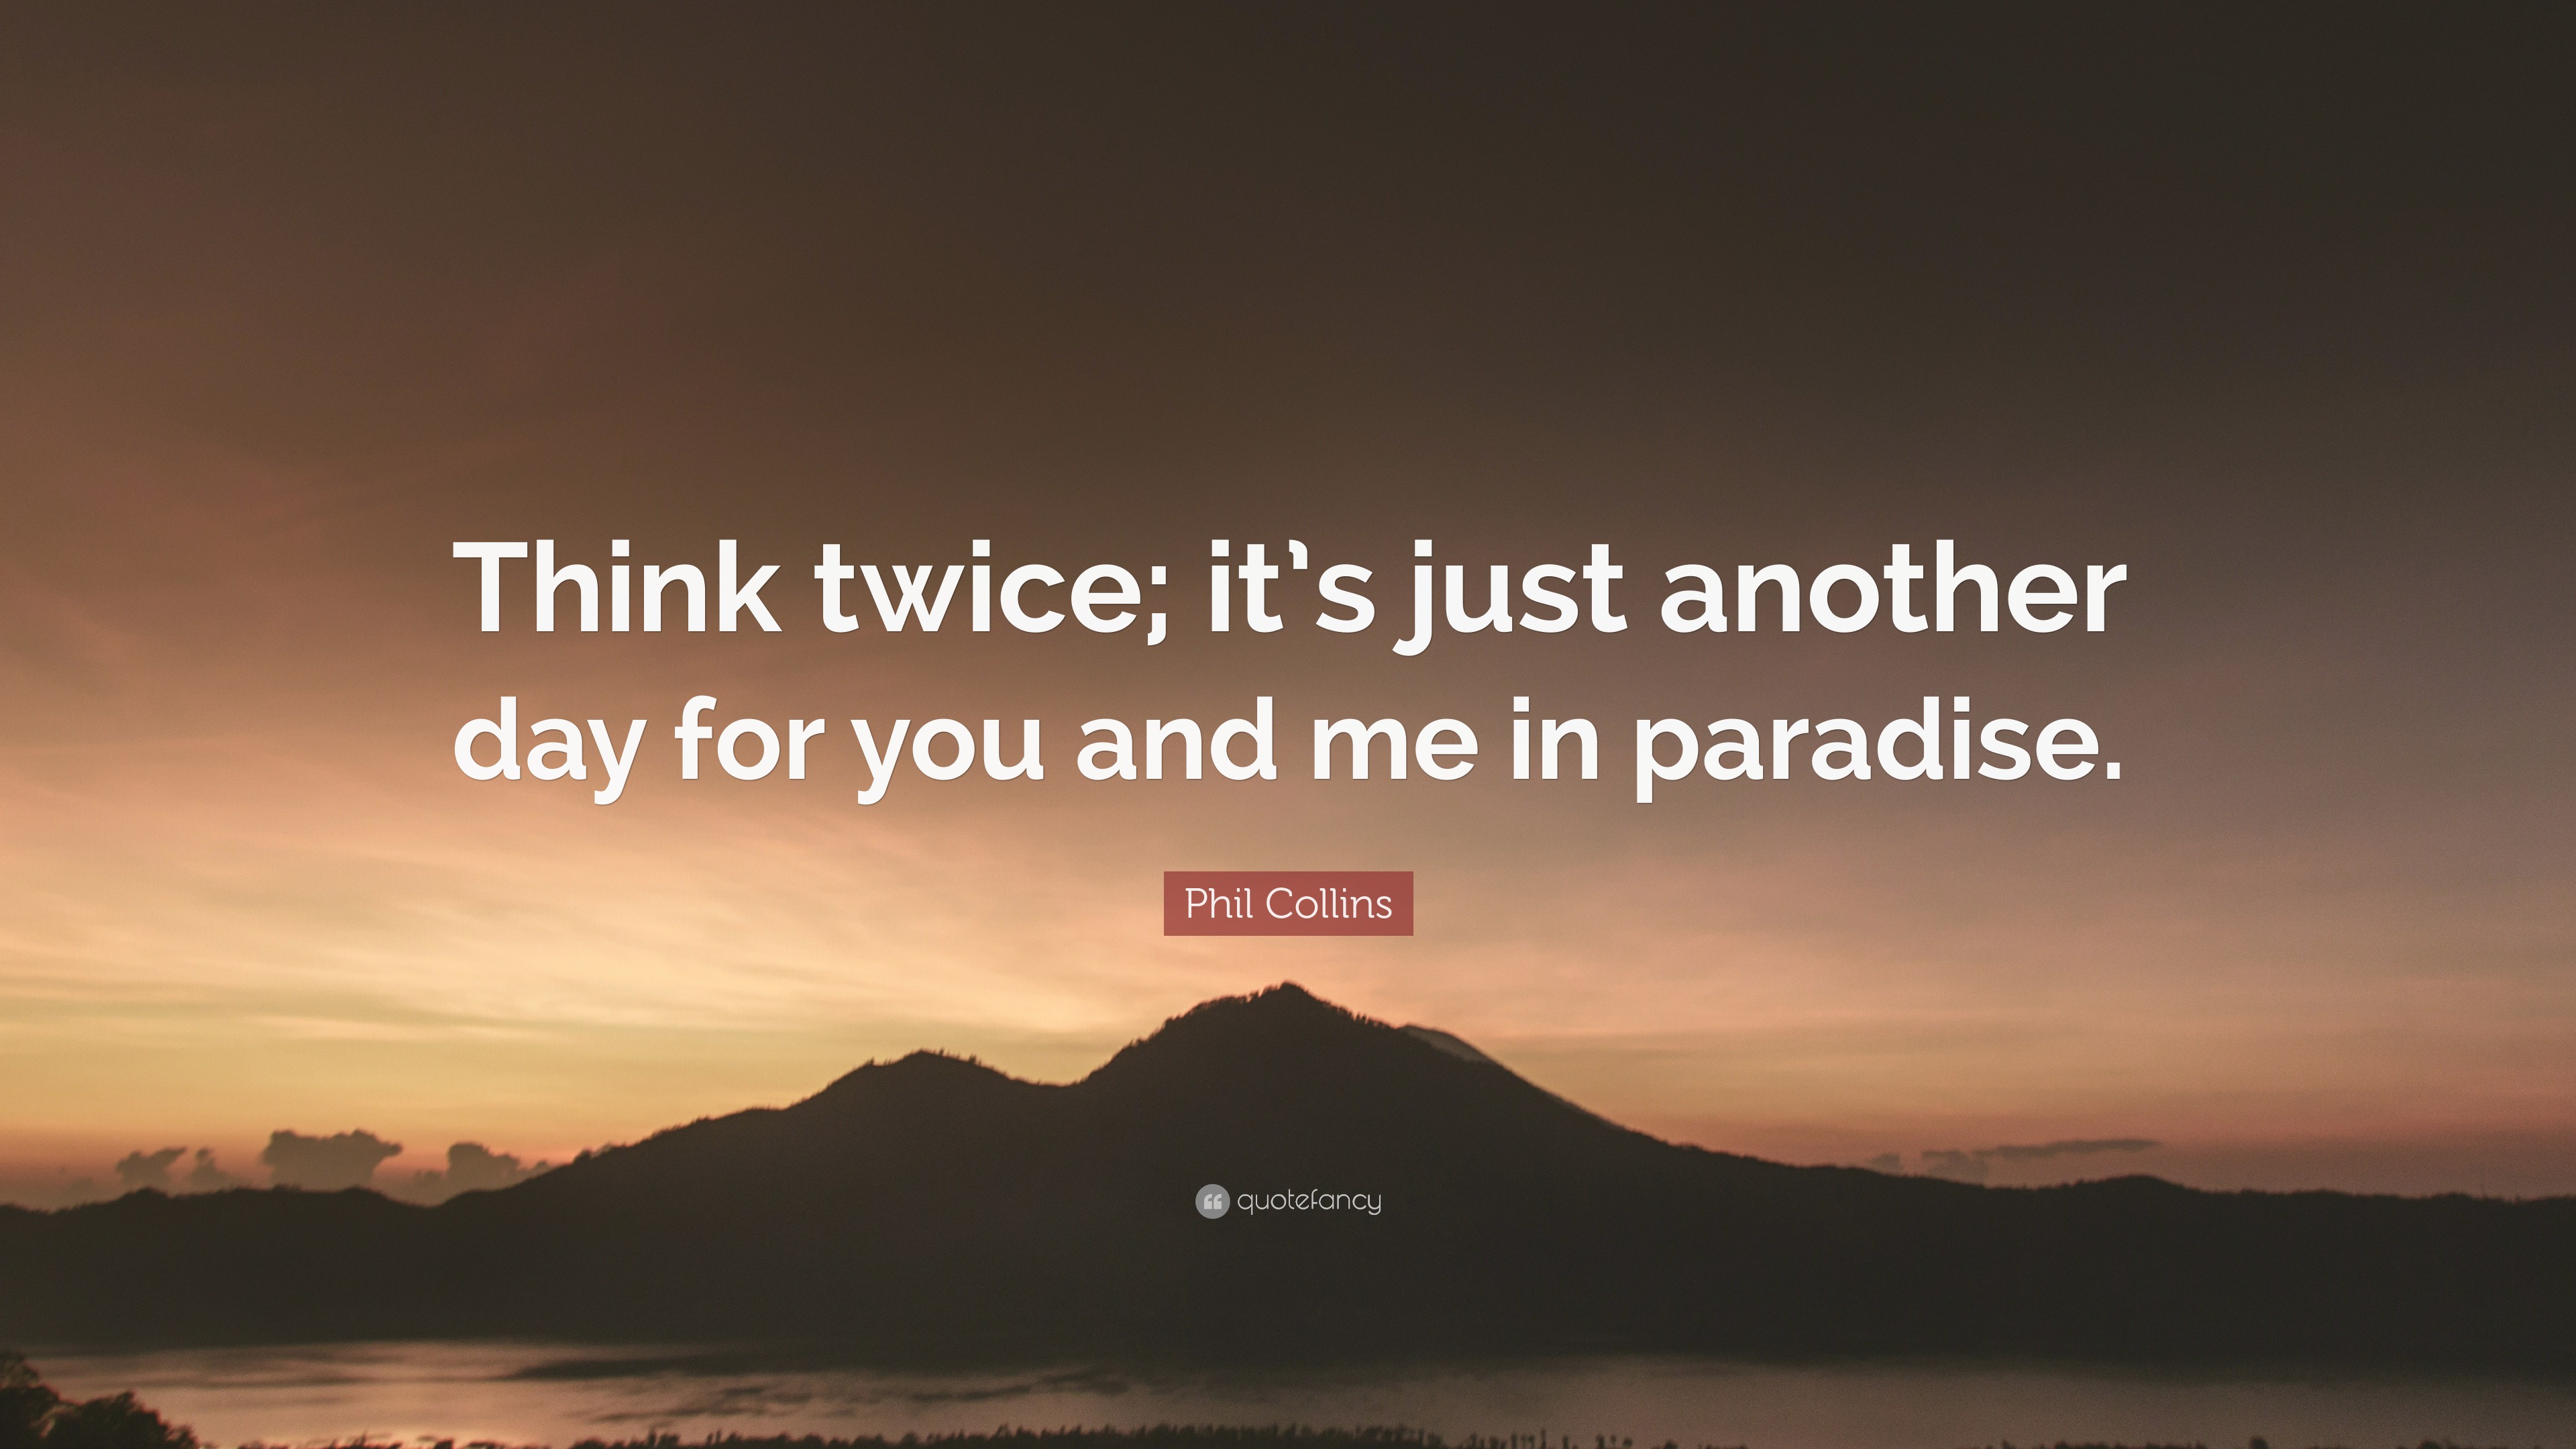 Phil Collins Quote: “Think twice; it’s just another day for you and me